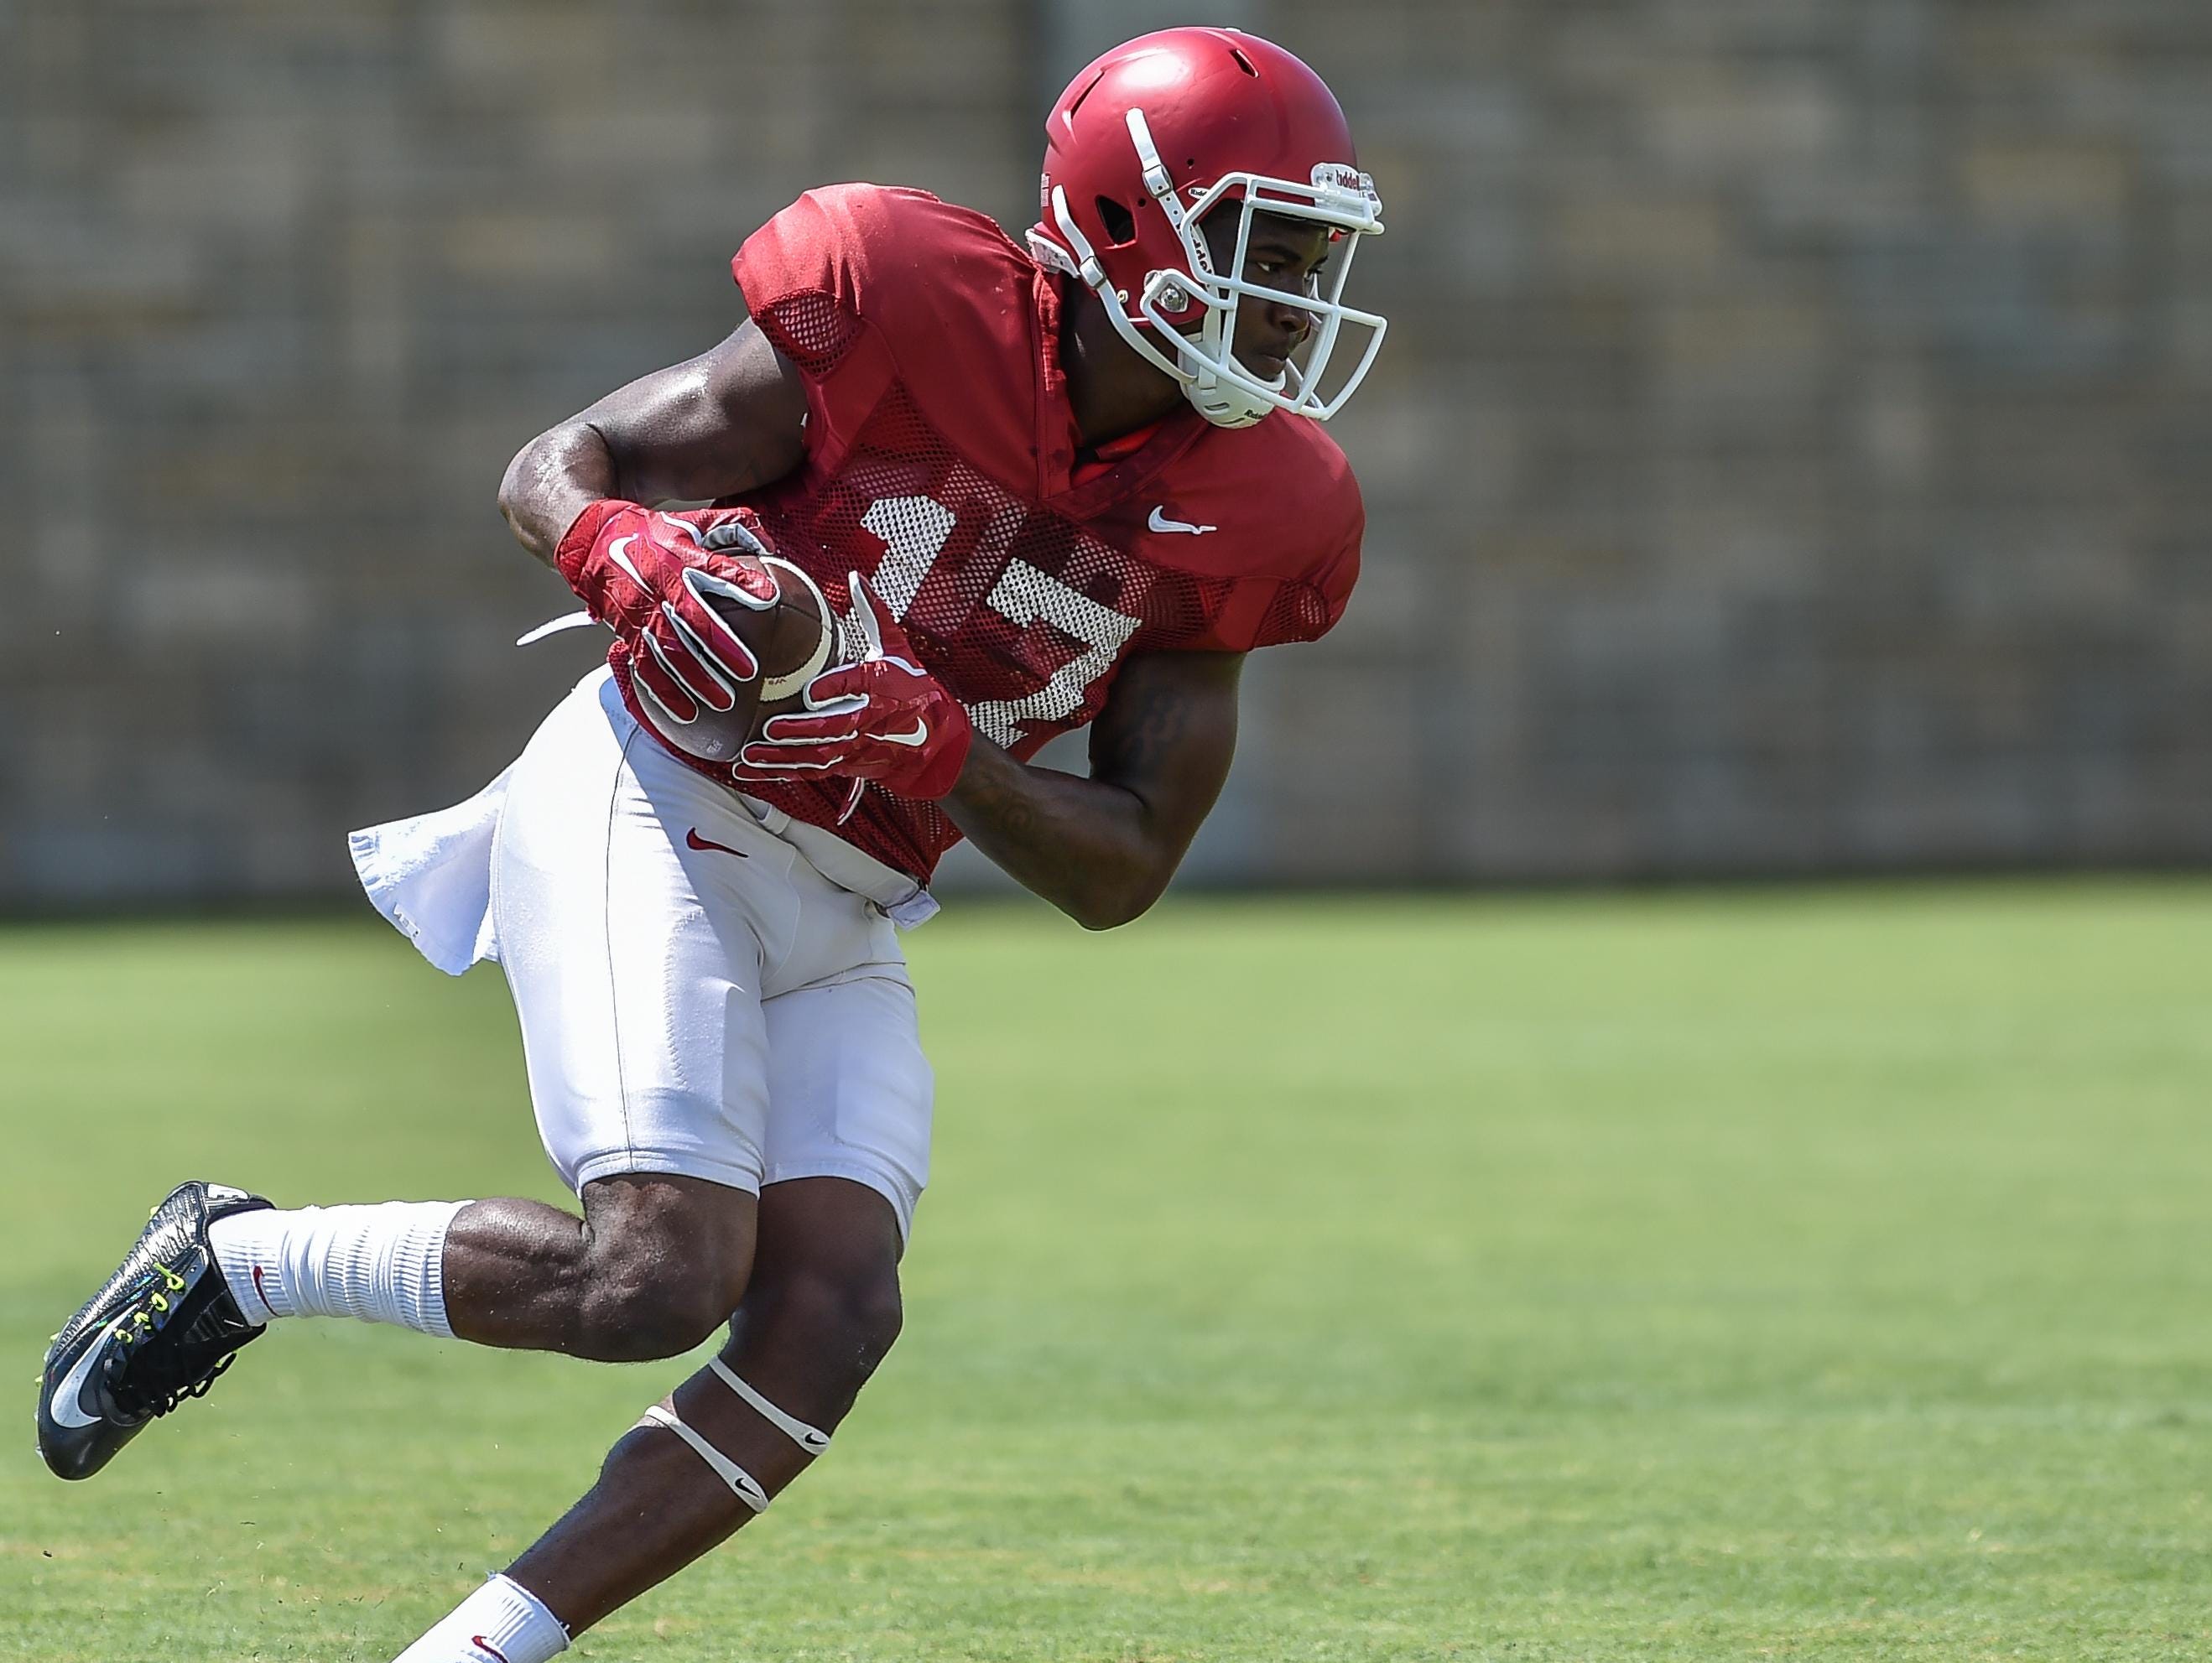 Arkansas’ talented redshirt freshman wide receiver JoJo Robinson was officially reinstated to the team on Monday by head coach Bret Bielema.